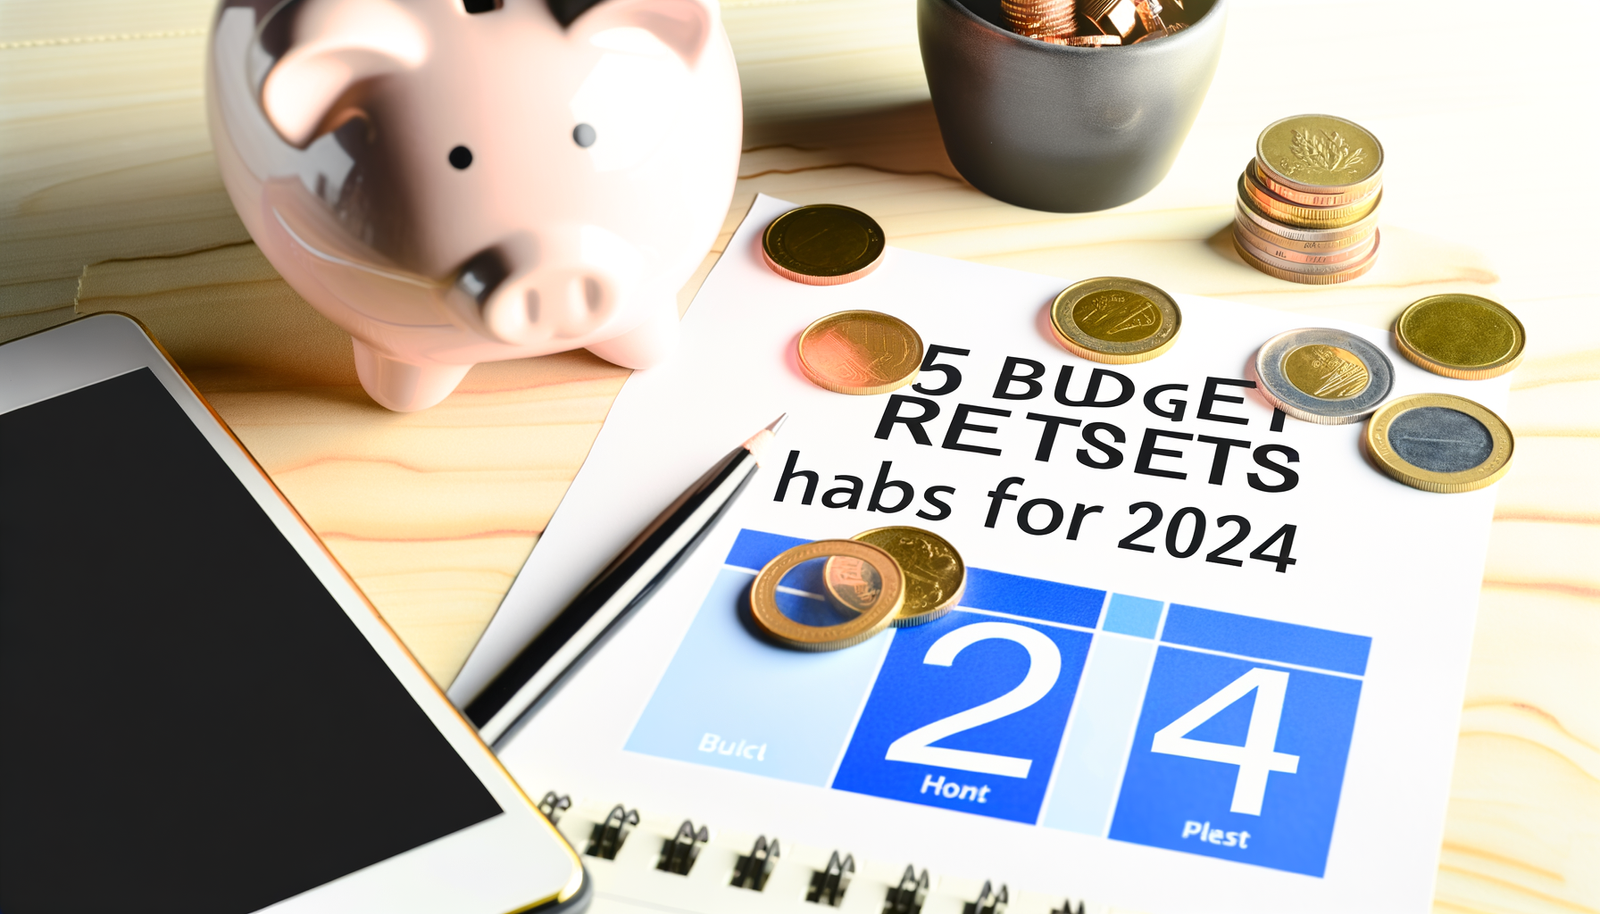 5 Budget Reset Habits for 2024